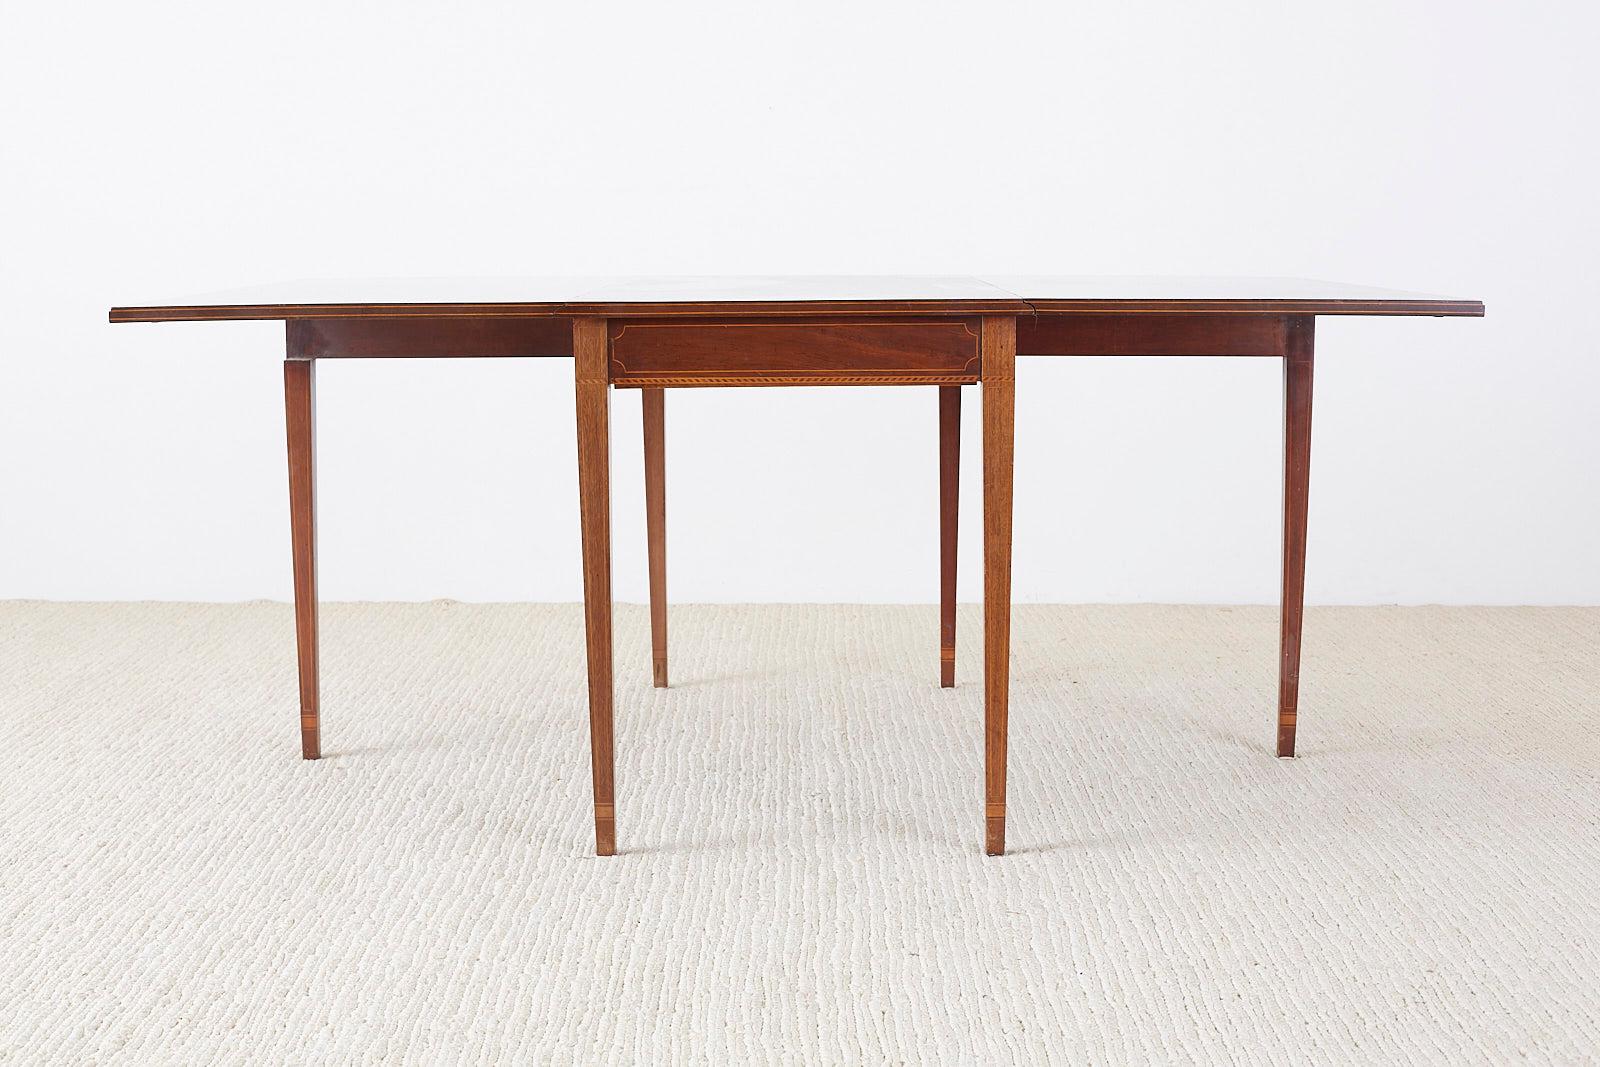 20th Century American Hepplewhite Style Mahogany Banquet Dining Table